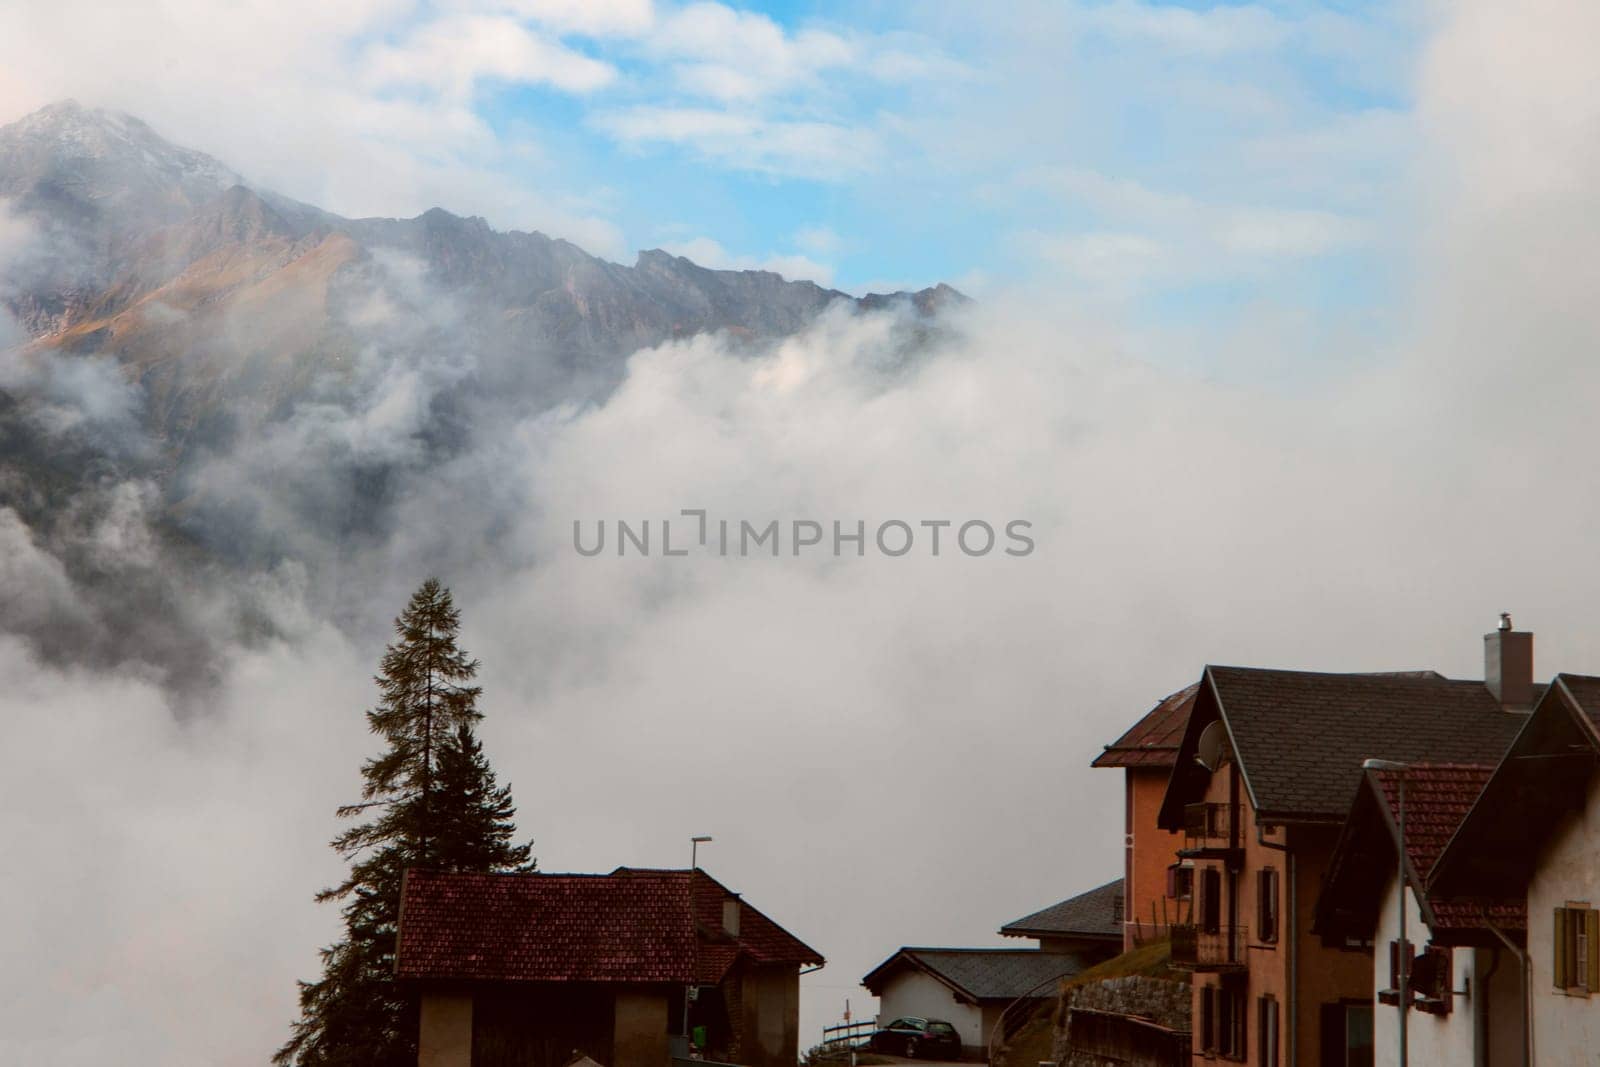 Clouds and Peaks: A Village Morning at the Foot of Whispering Alpine Giants. High quality photo